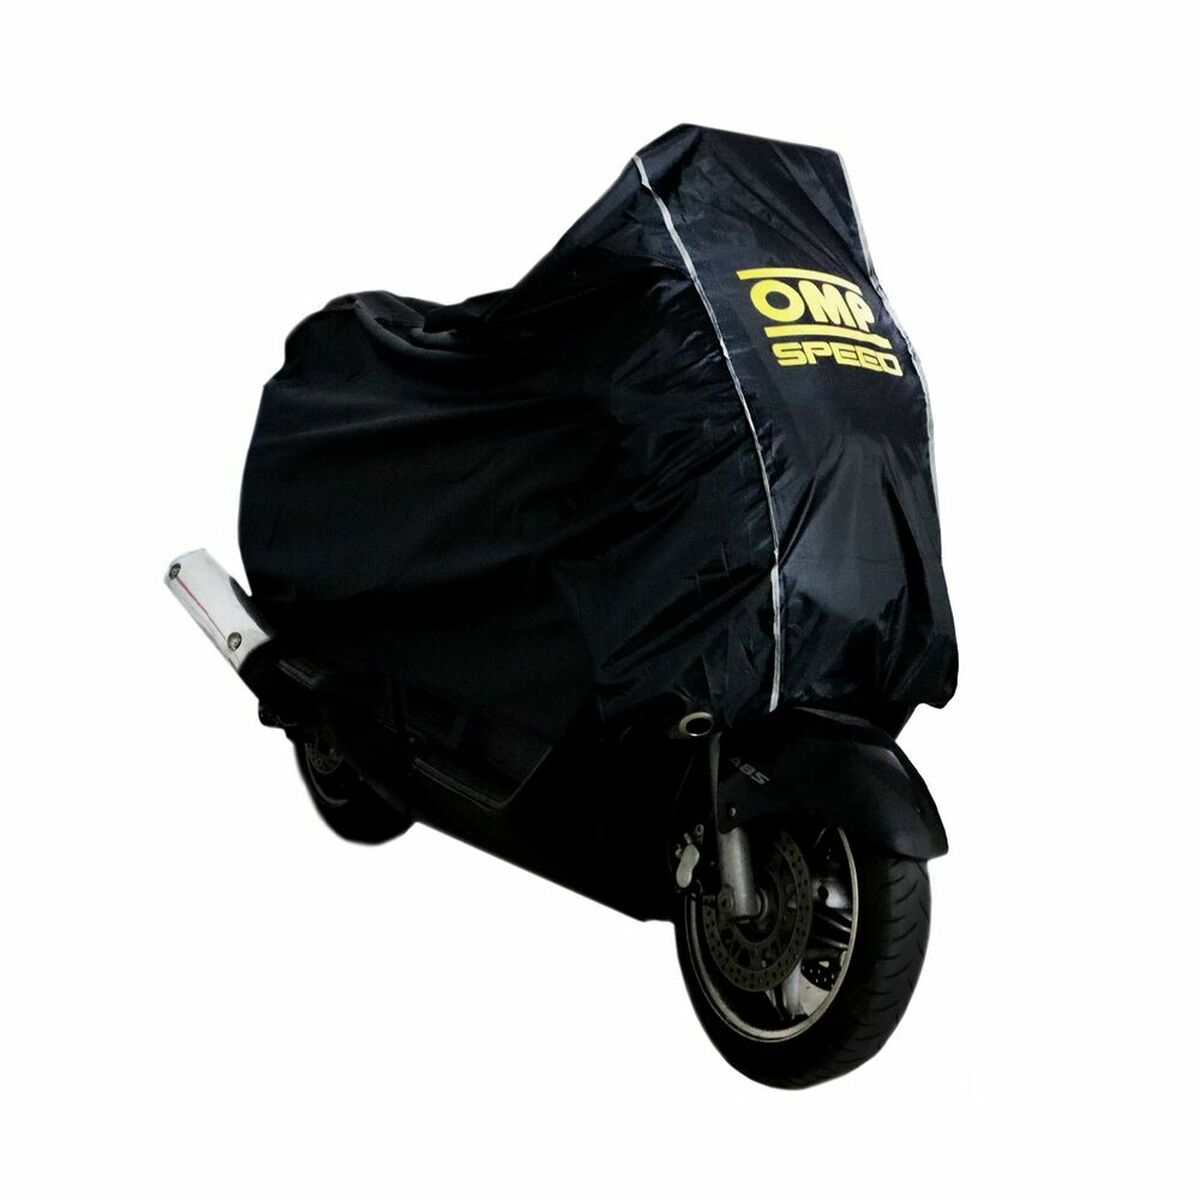 Motorcycle Cover OMP OMPS18020819 Black